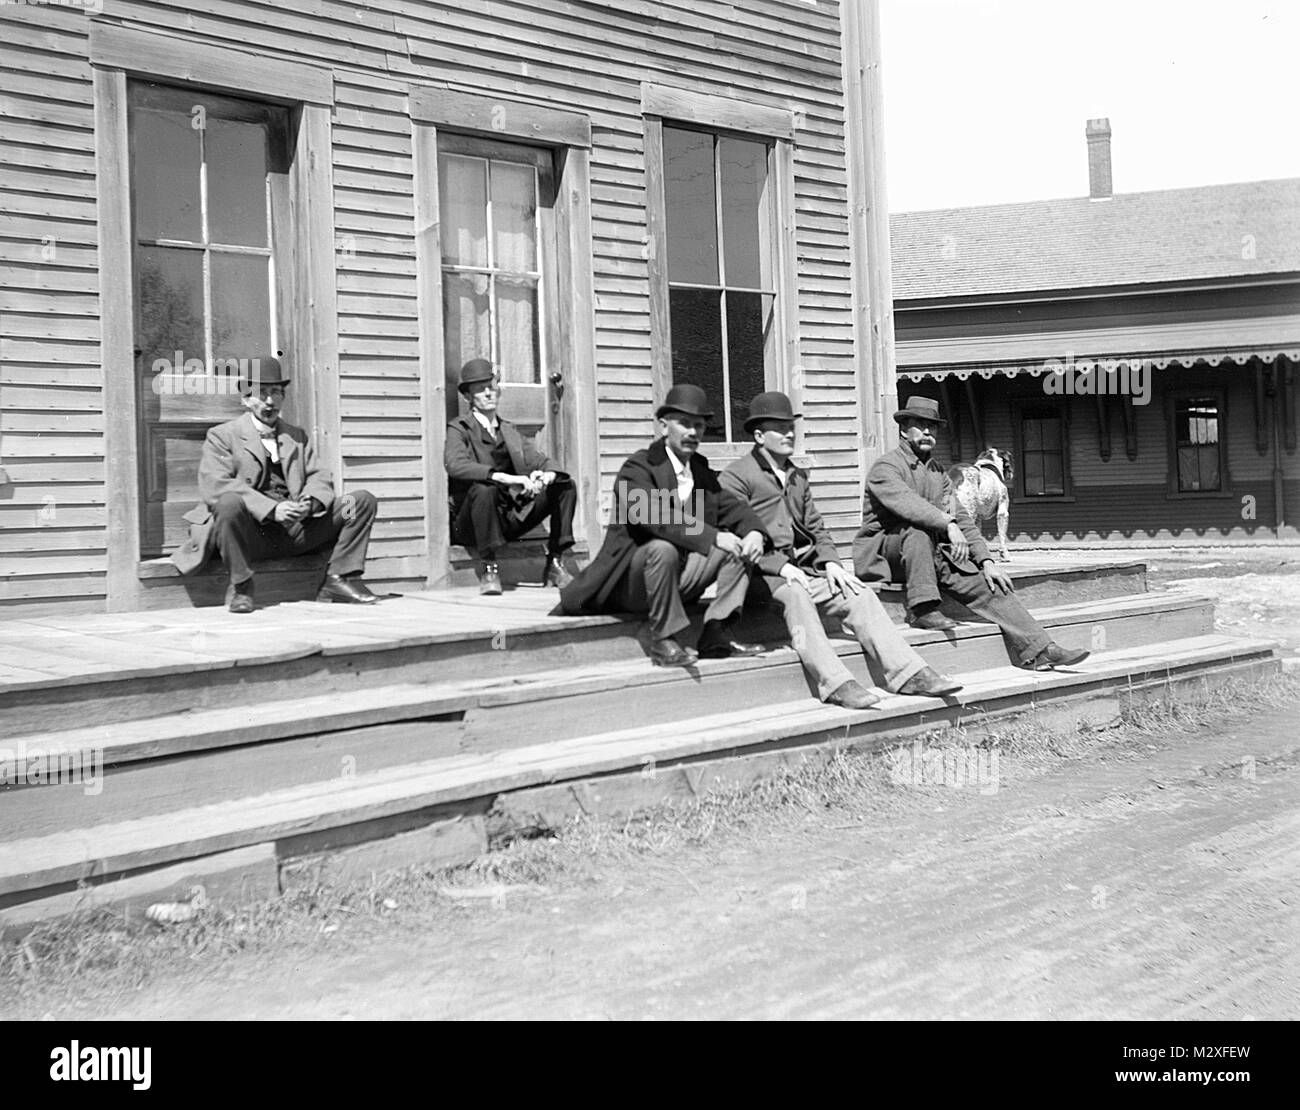 A gang of touch looking men sit on a wooden sidewalk in a western town, ca. 1890. Stock Photo